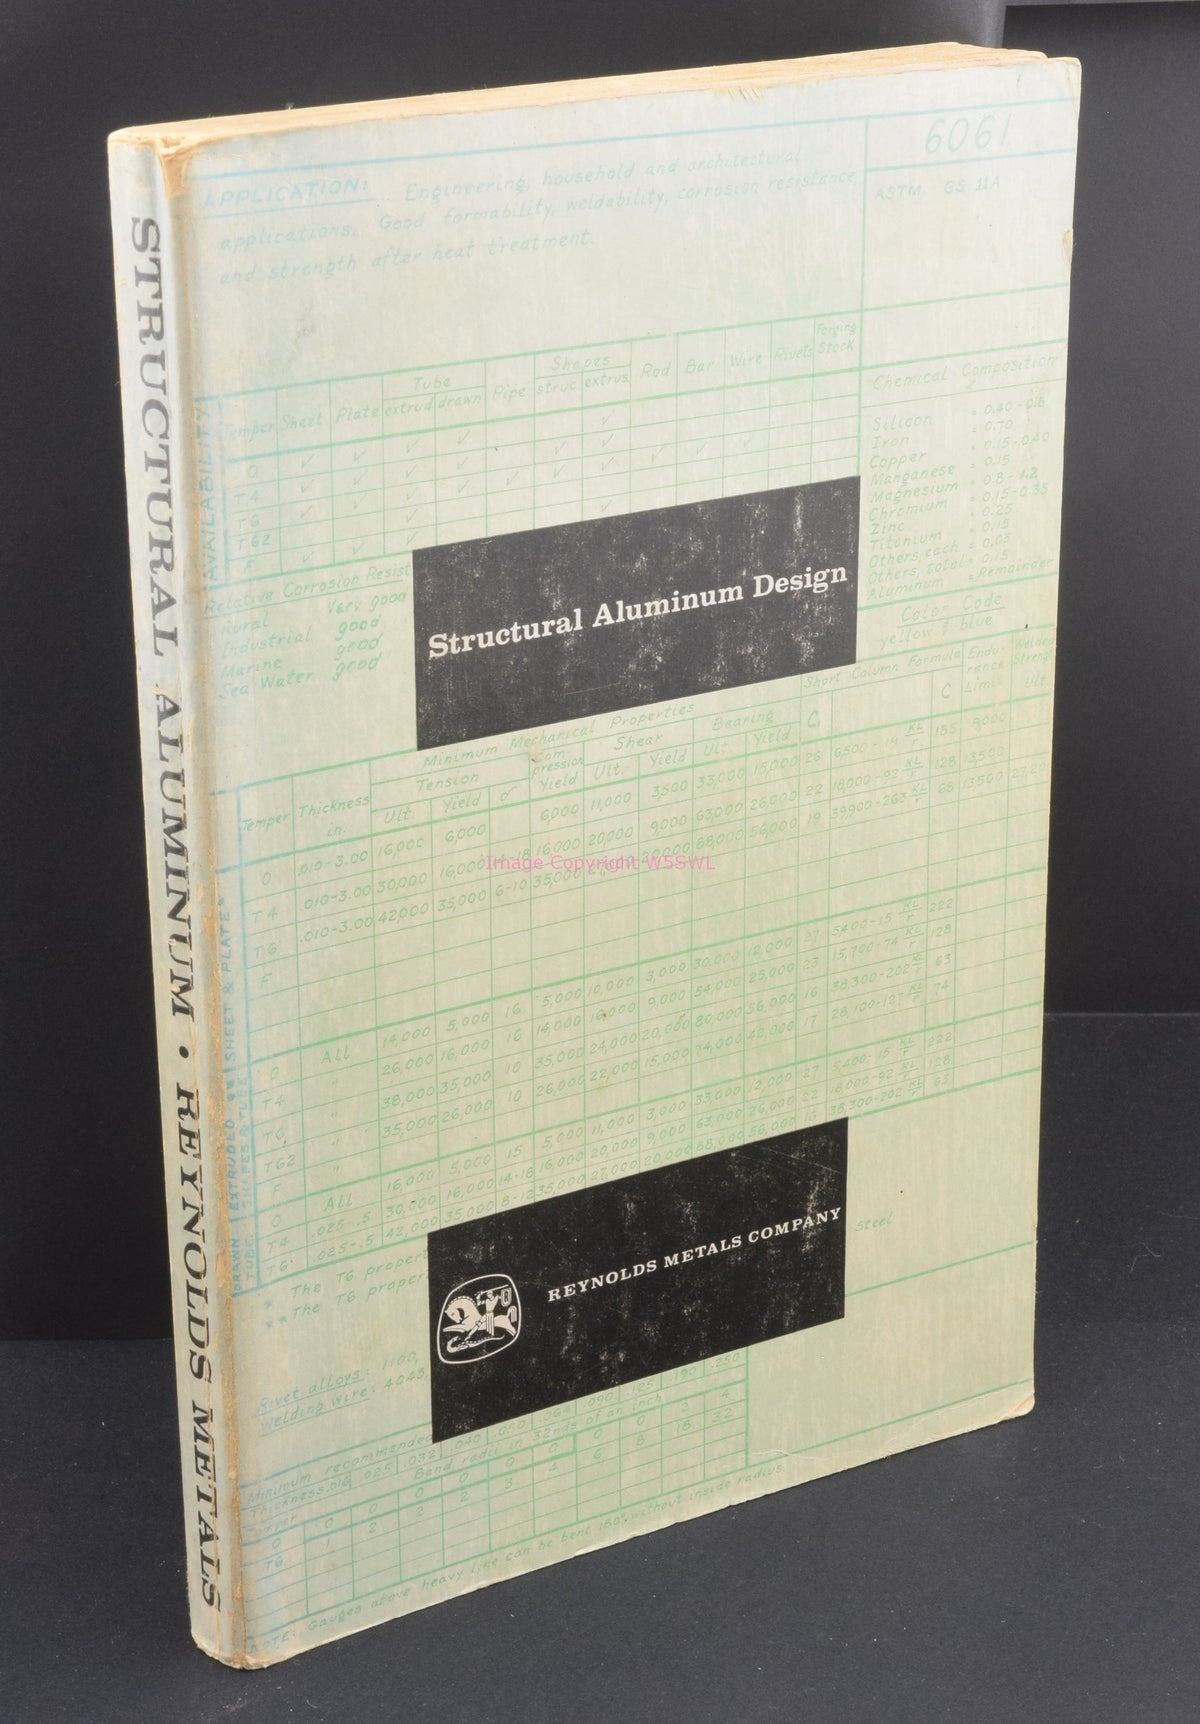 Structural Aluminum Design Reynolds Metal Company 1959 Structural Handbook - Dave's Hobby Shop by W5SWL